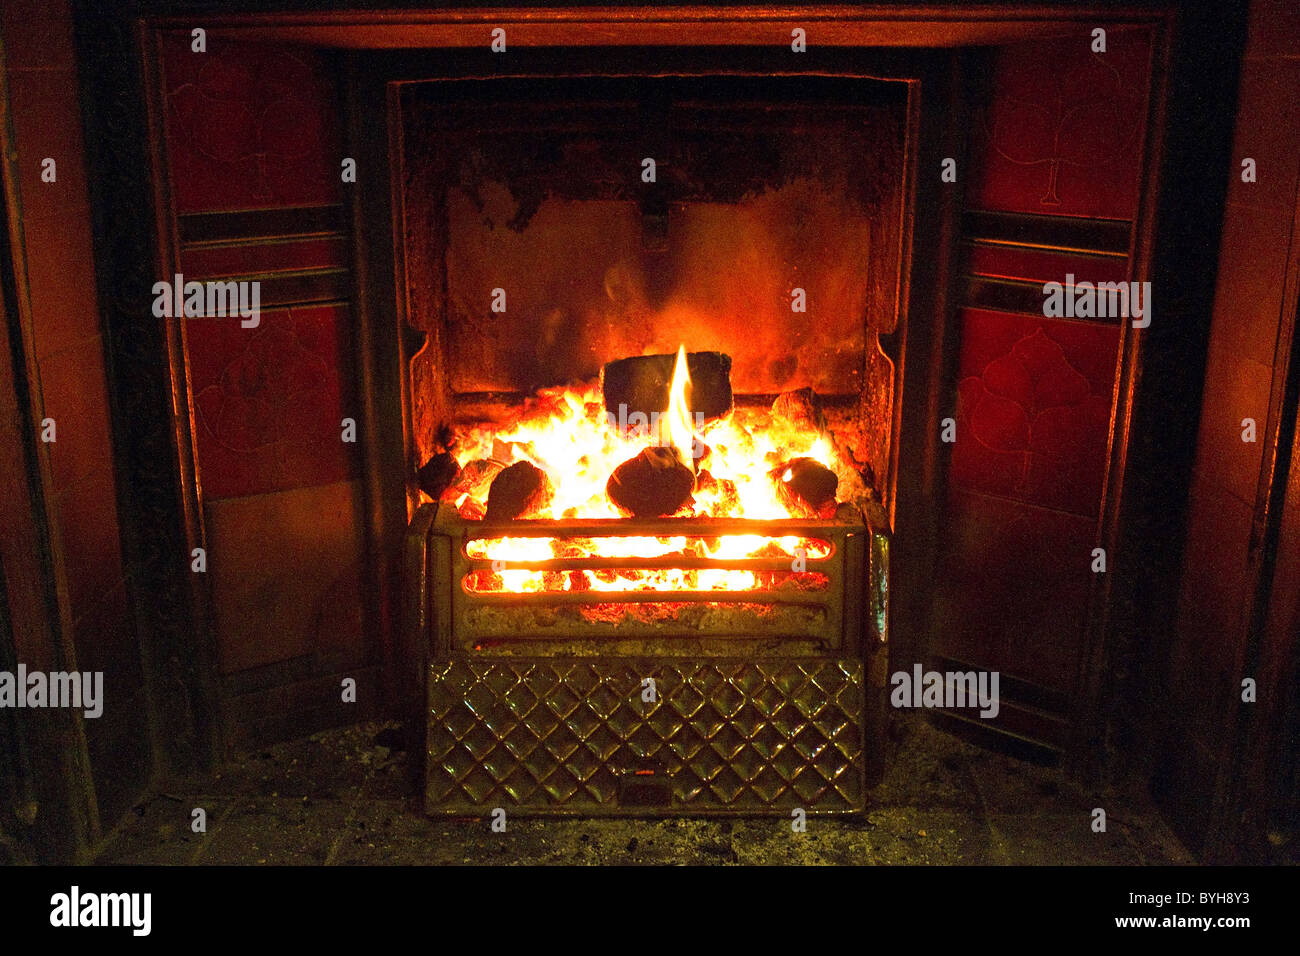 A roaring coal fire in a traditional fireplace Stock Photo